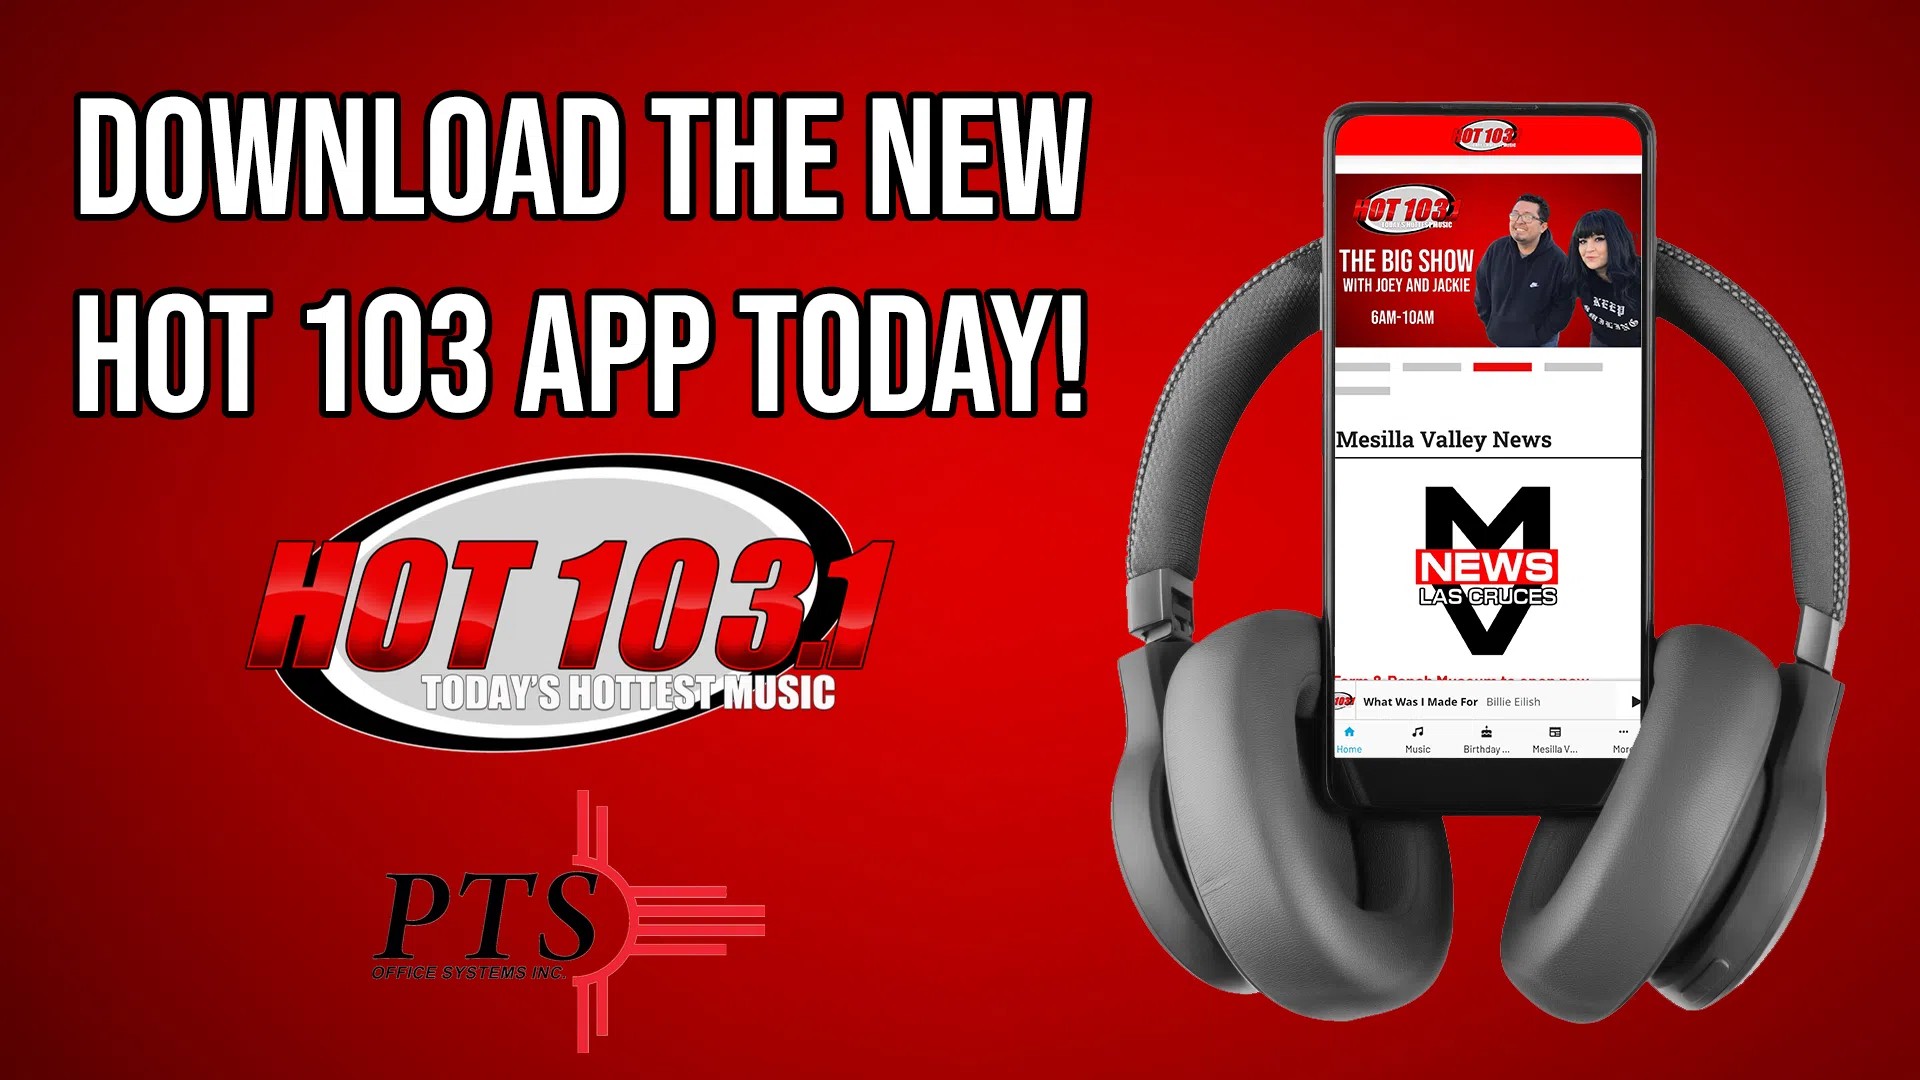 Feature: https://www.hot103.fm/download-the-app/